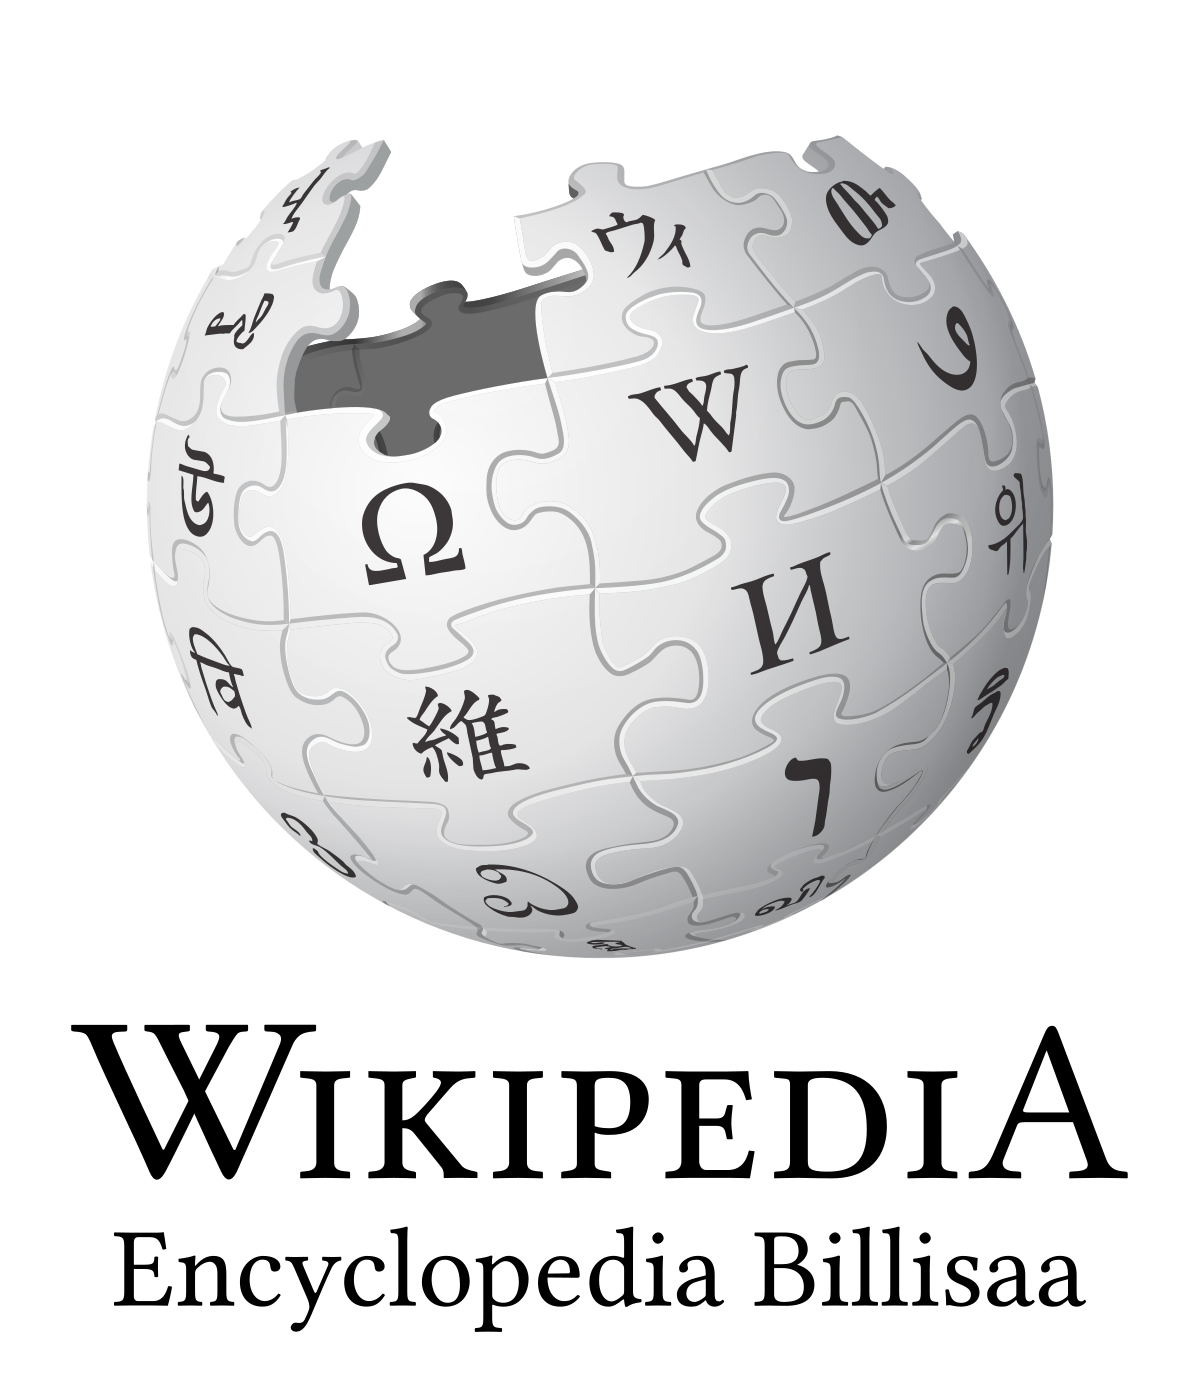 https://upload.wikimedia.org/wikipedia/commons/thumb/2/28/Wikipedia-logo-v2-om.svg/1200px-Wikipedia-logo-v2-om.svg.png